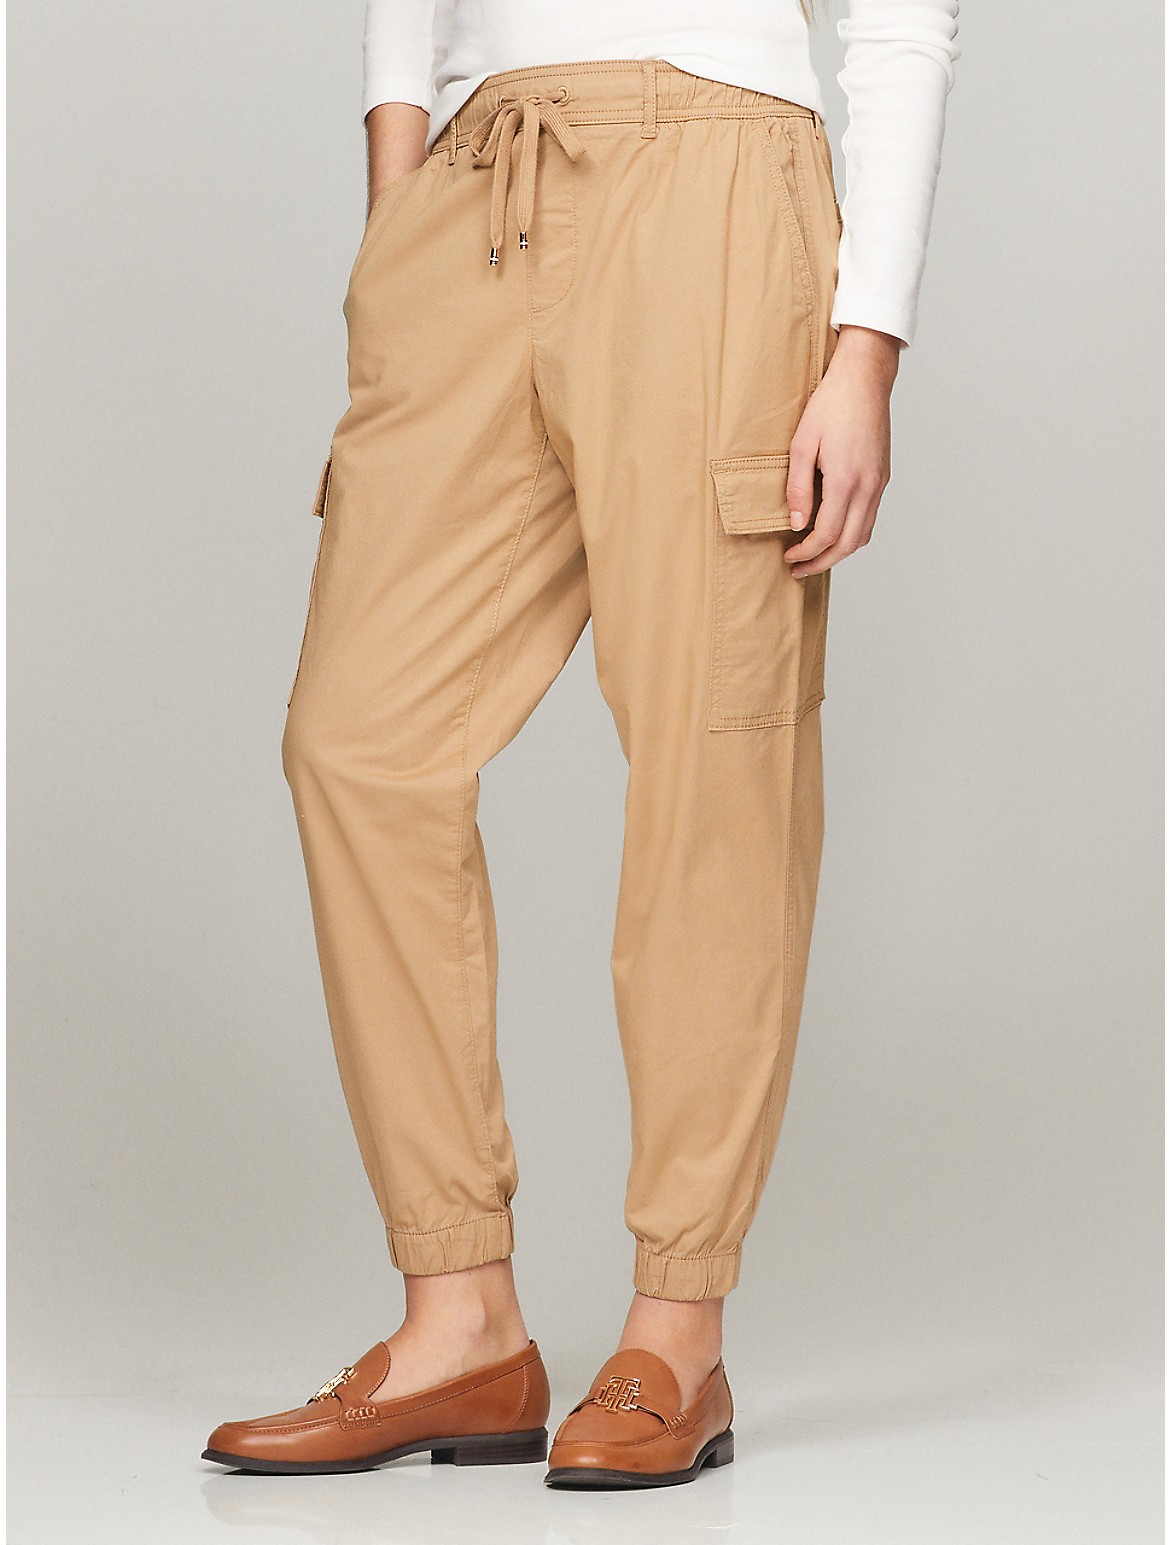 Tommy Hilfiger Women's Stretch Cotton Cargo Chino Jogger